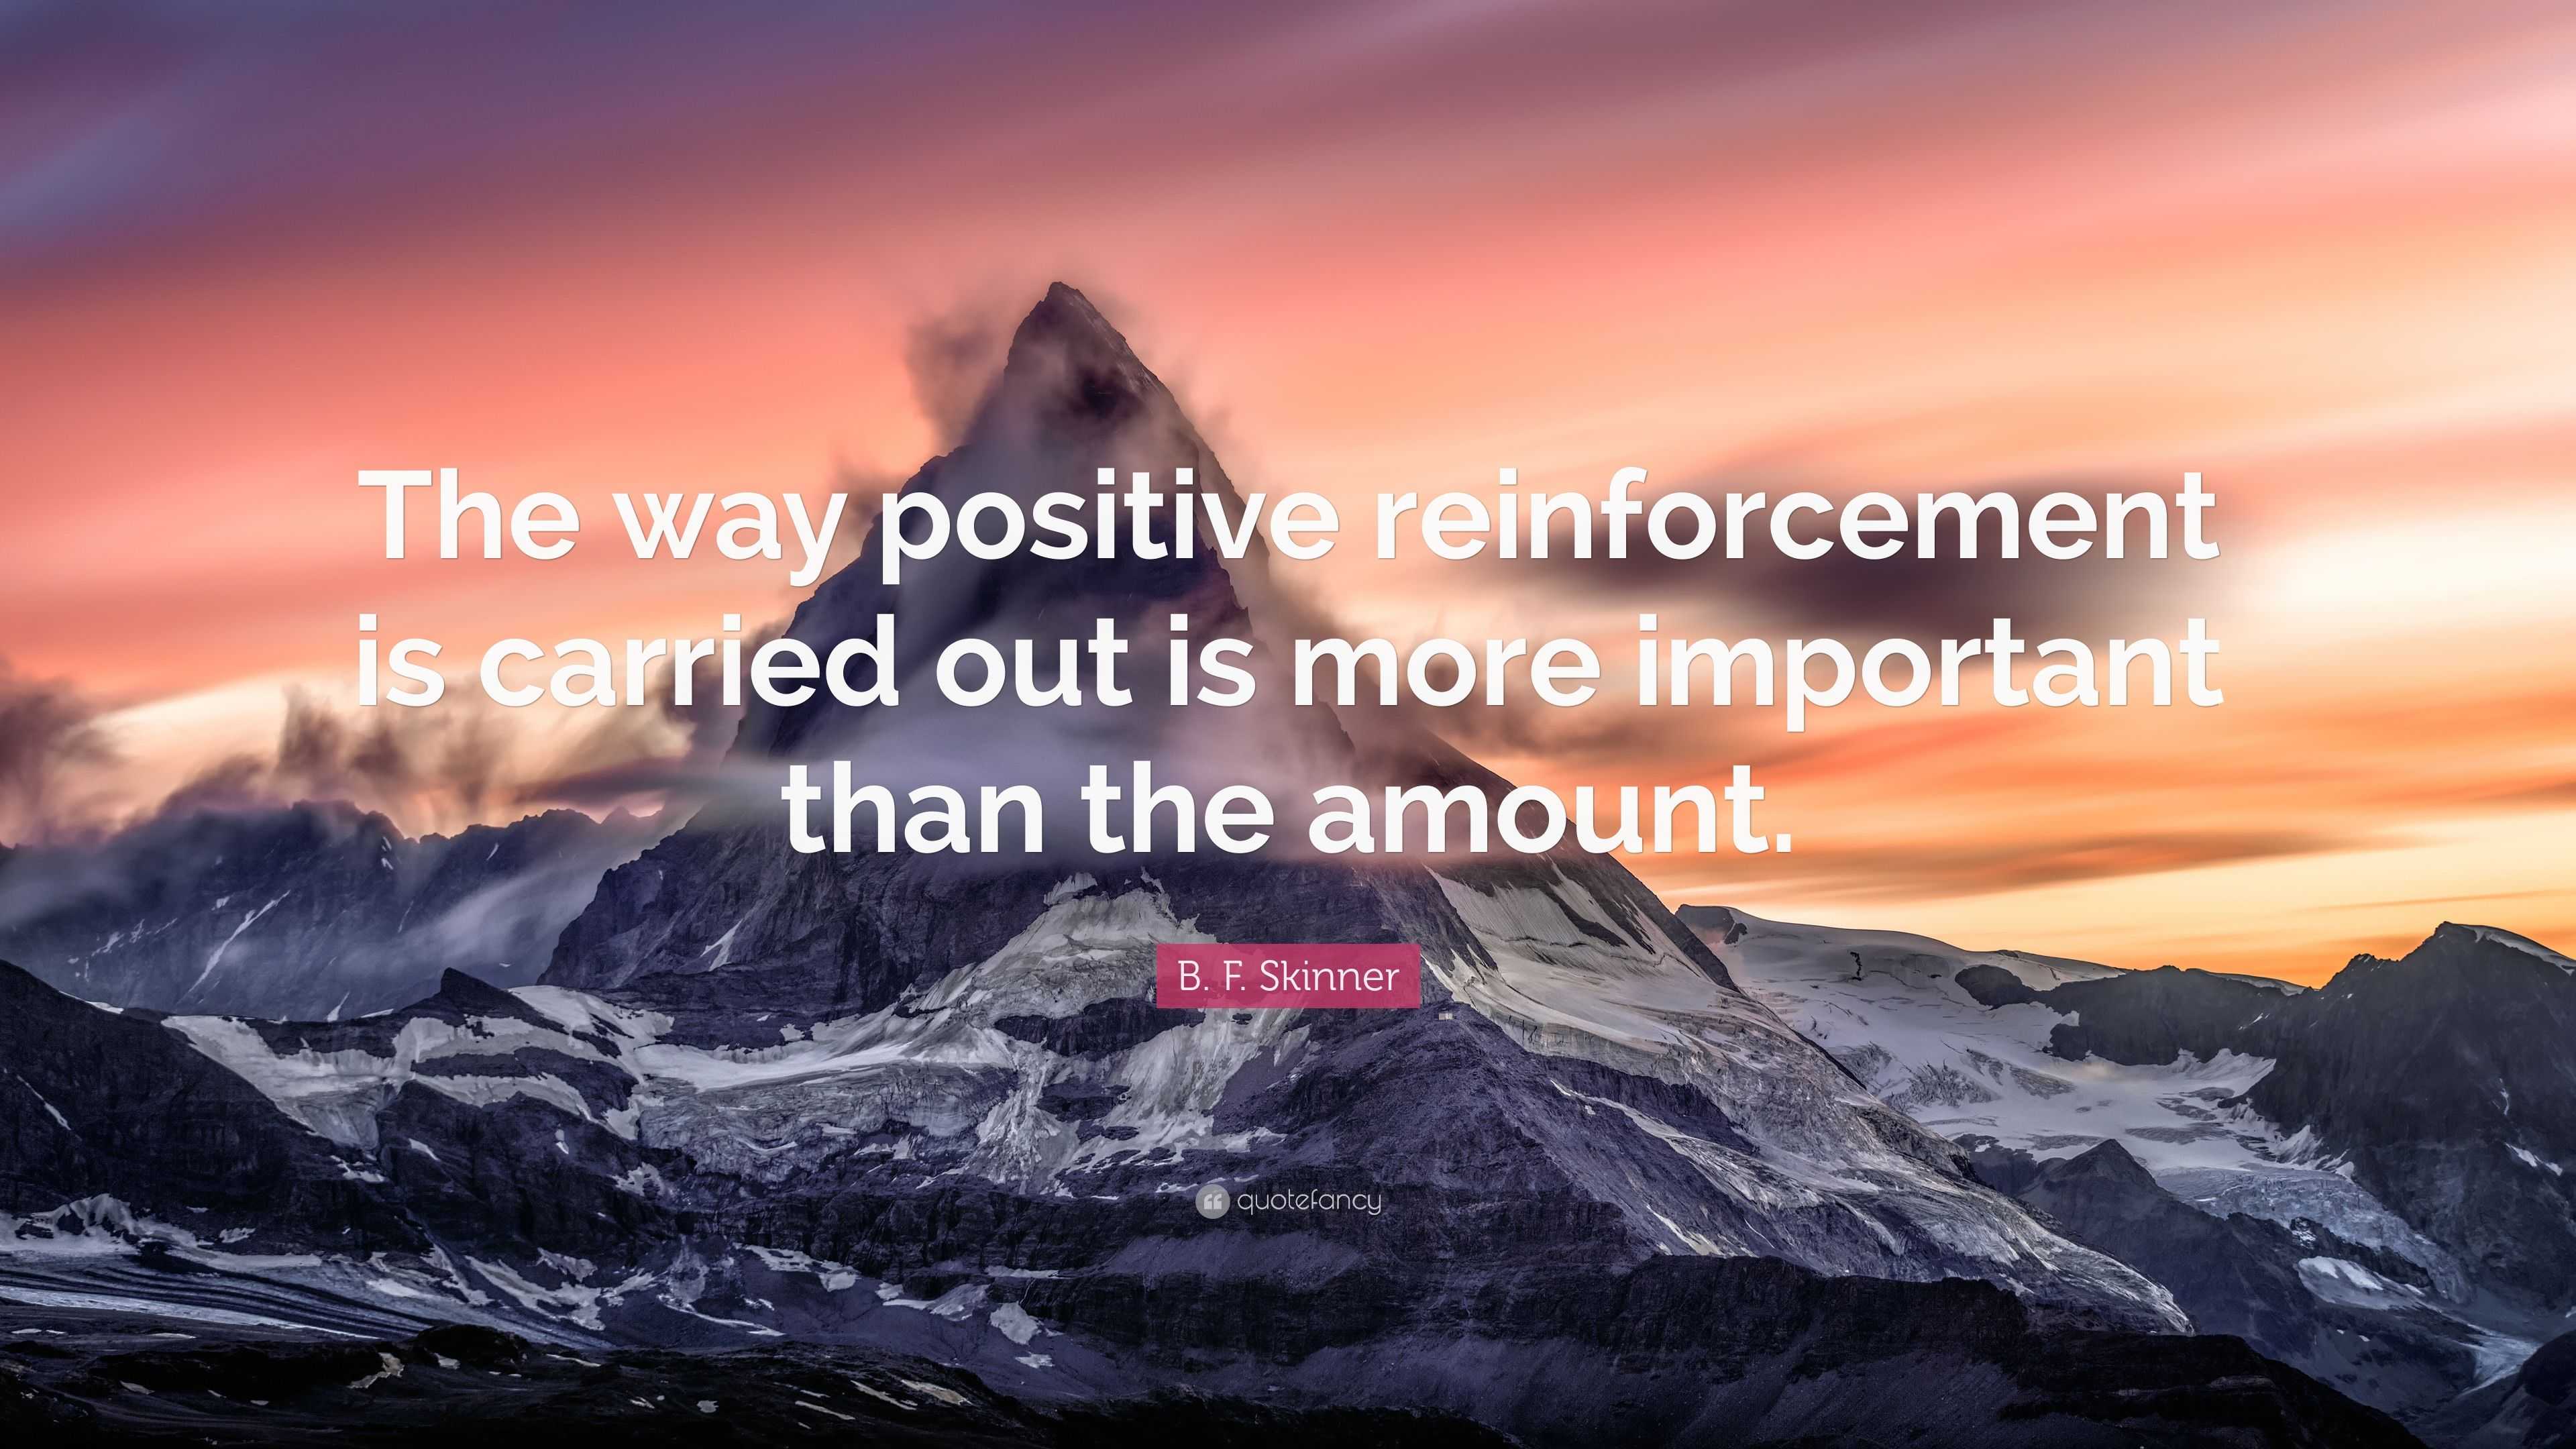 B. F. Skinner Quote: “The way positive reinforcement is carried out is